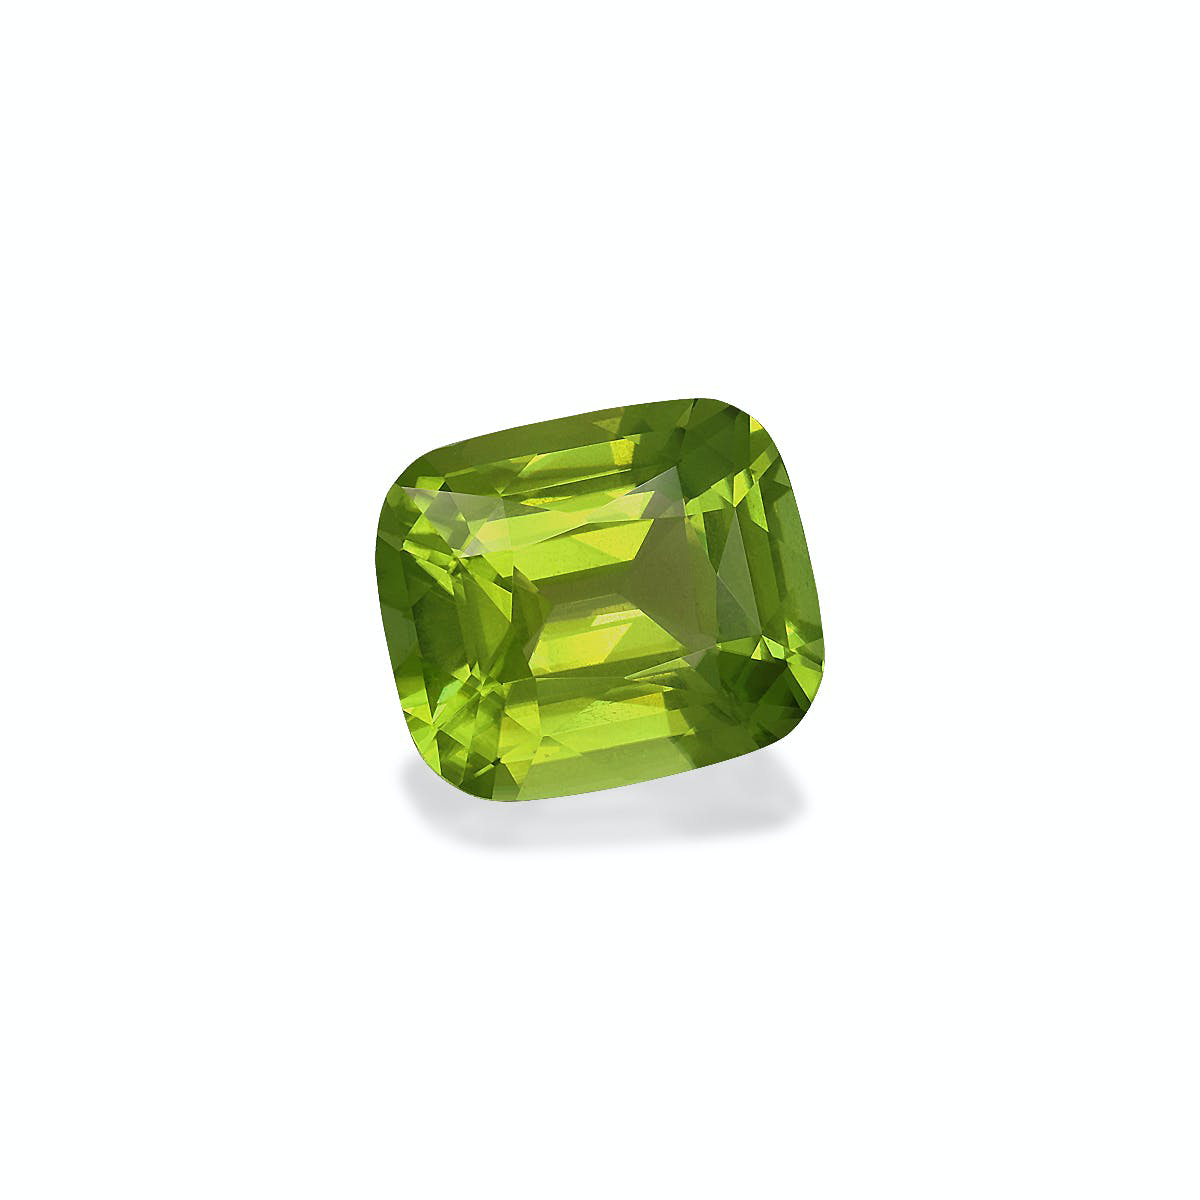 Picture of Pistachio Green Peridot 5.68ct - 12x10mm (PD0047)